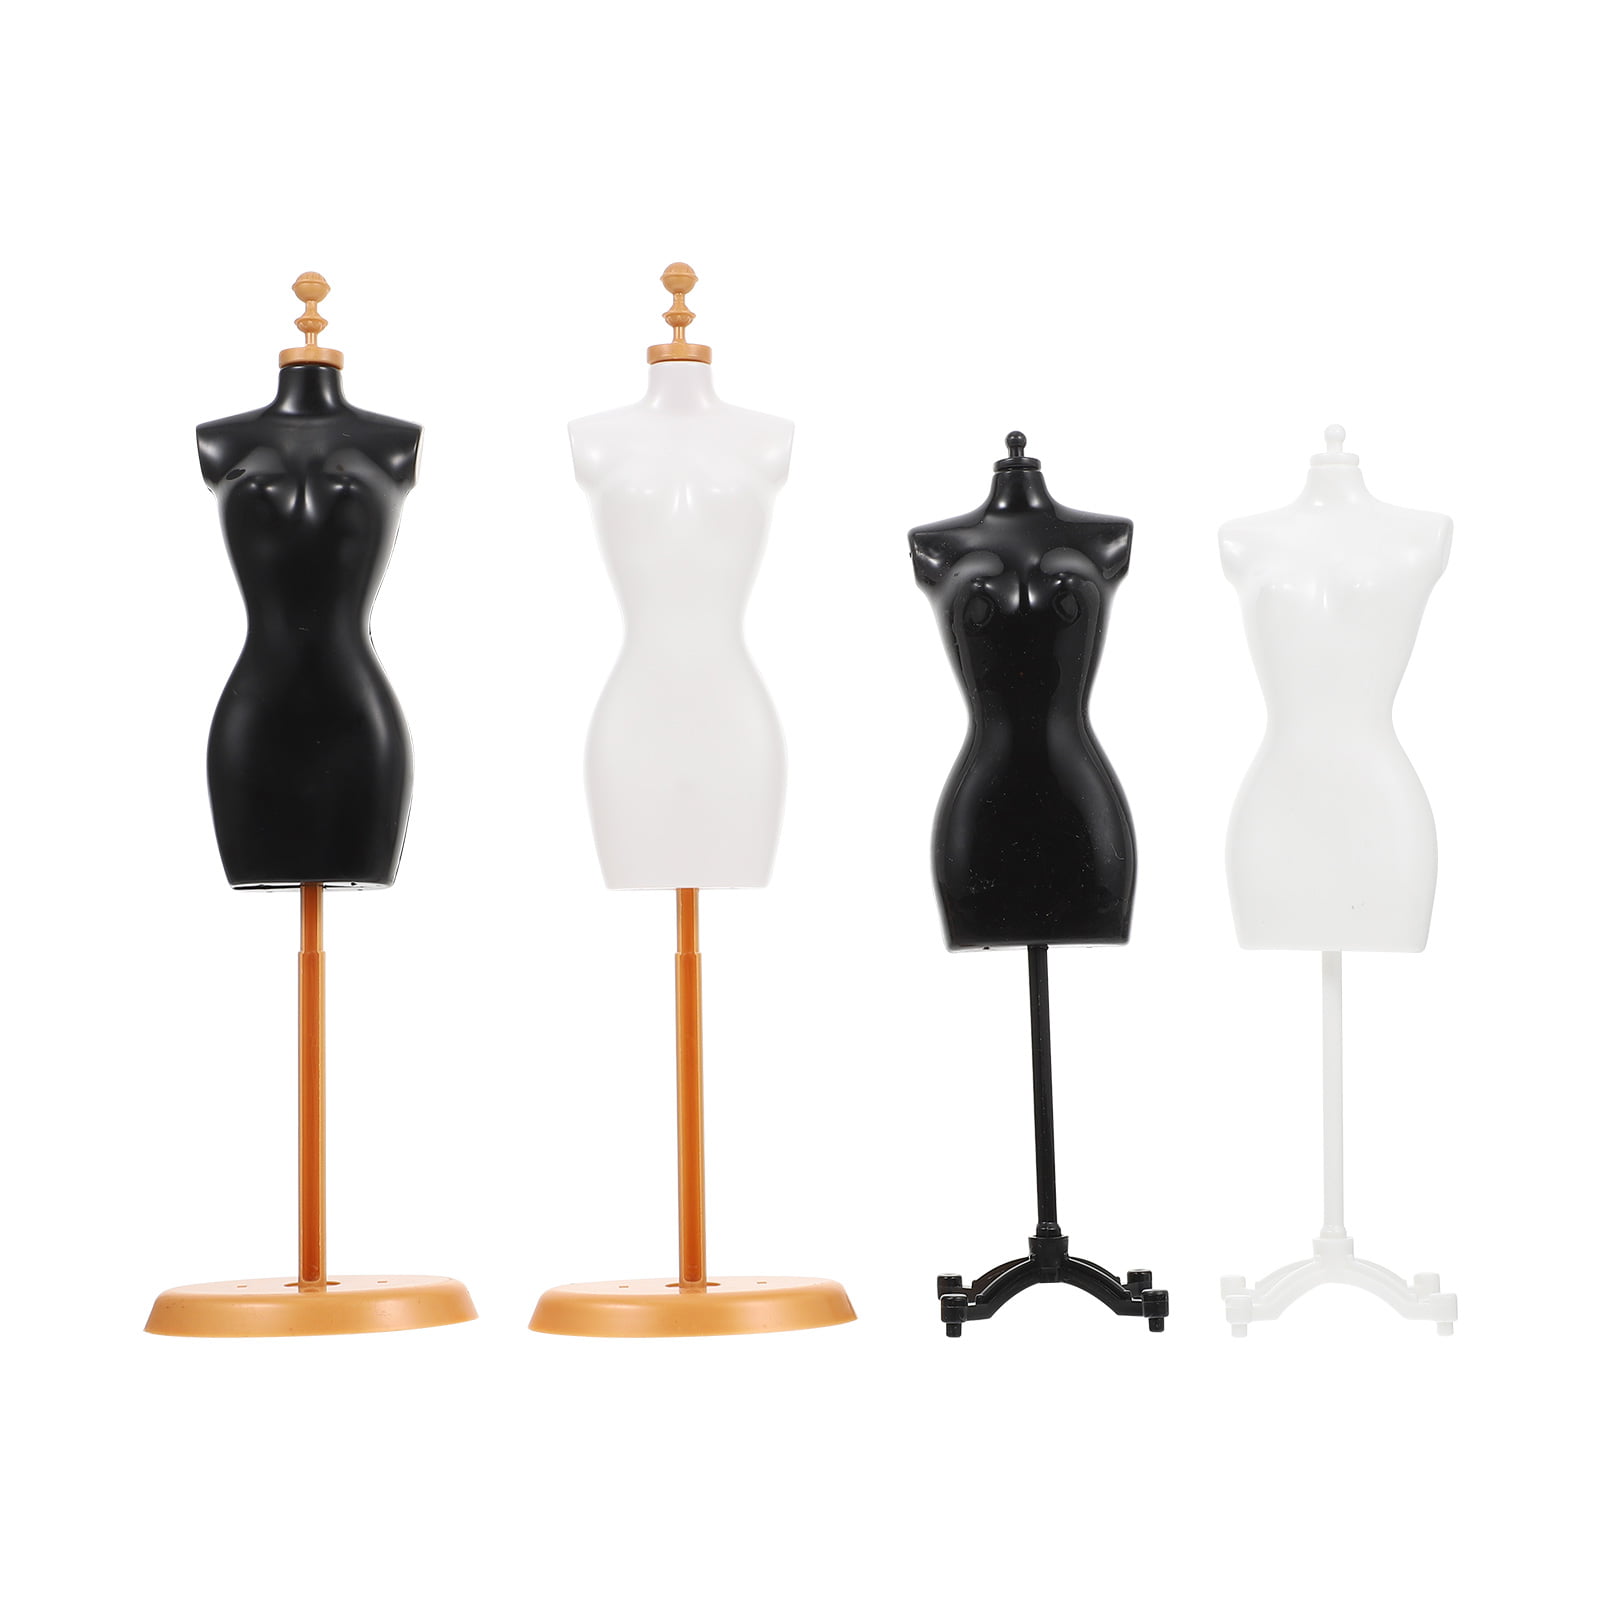  Abaodam 2pcs Mini Mannequin Stand Clothes Hanging Rack Stand  Girls' Dresses Babydoll Doll Torso Mini Dressmaker Form Dress Form  Mannequin Doll Dress Mannequin with Stand Doll Clothing Rack : Toys 